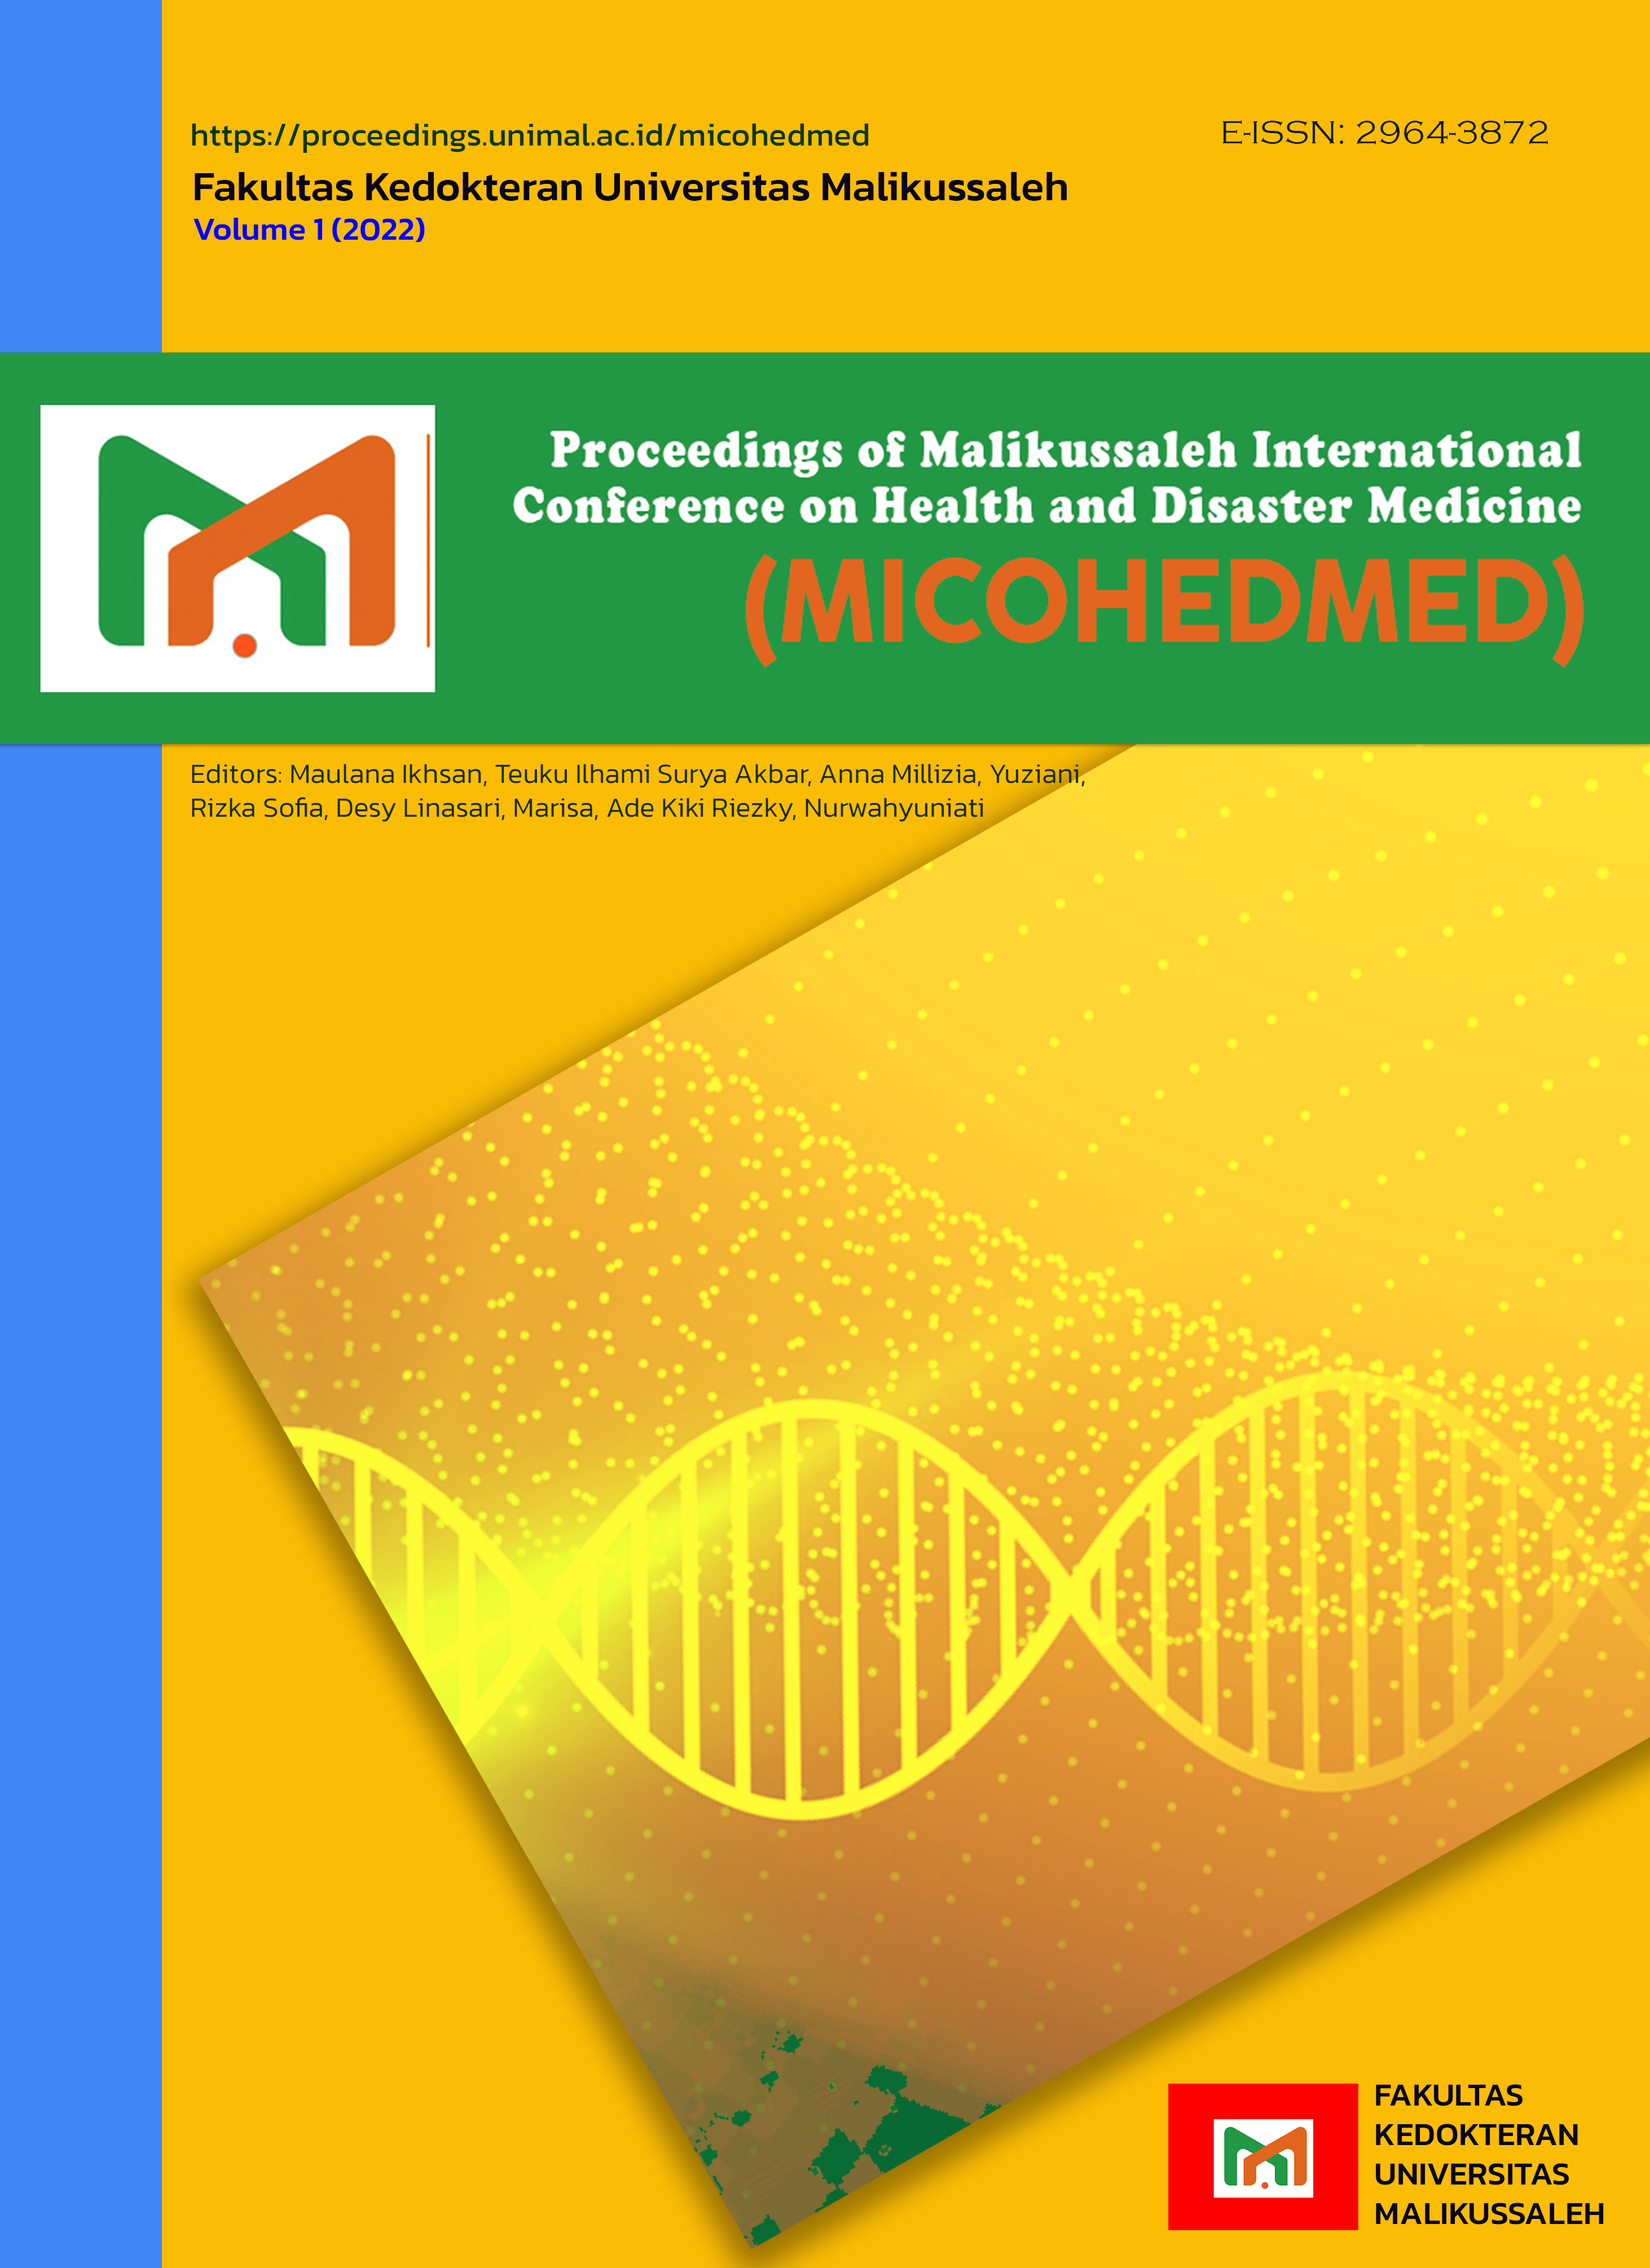 					View Vol. 1 (2022): Proceedings of Malikussaleh International Conference on Health and Disaster Medicine (MICOHEDMED) 2022
				